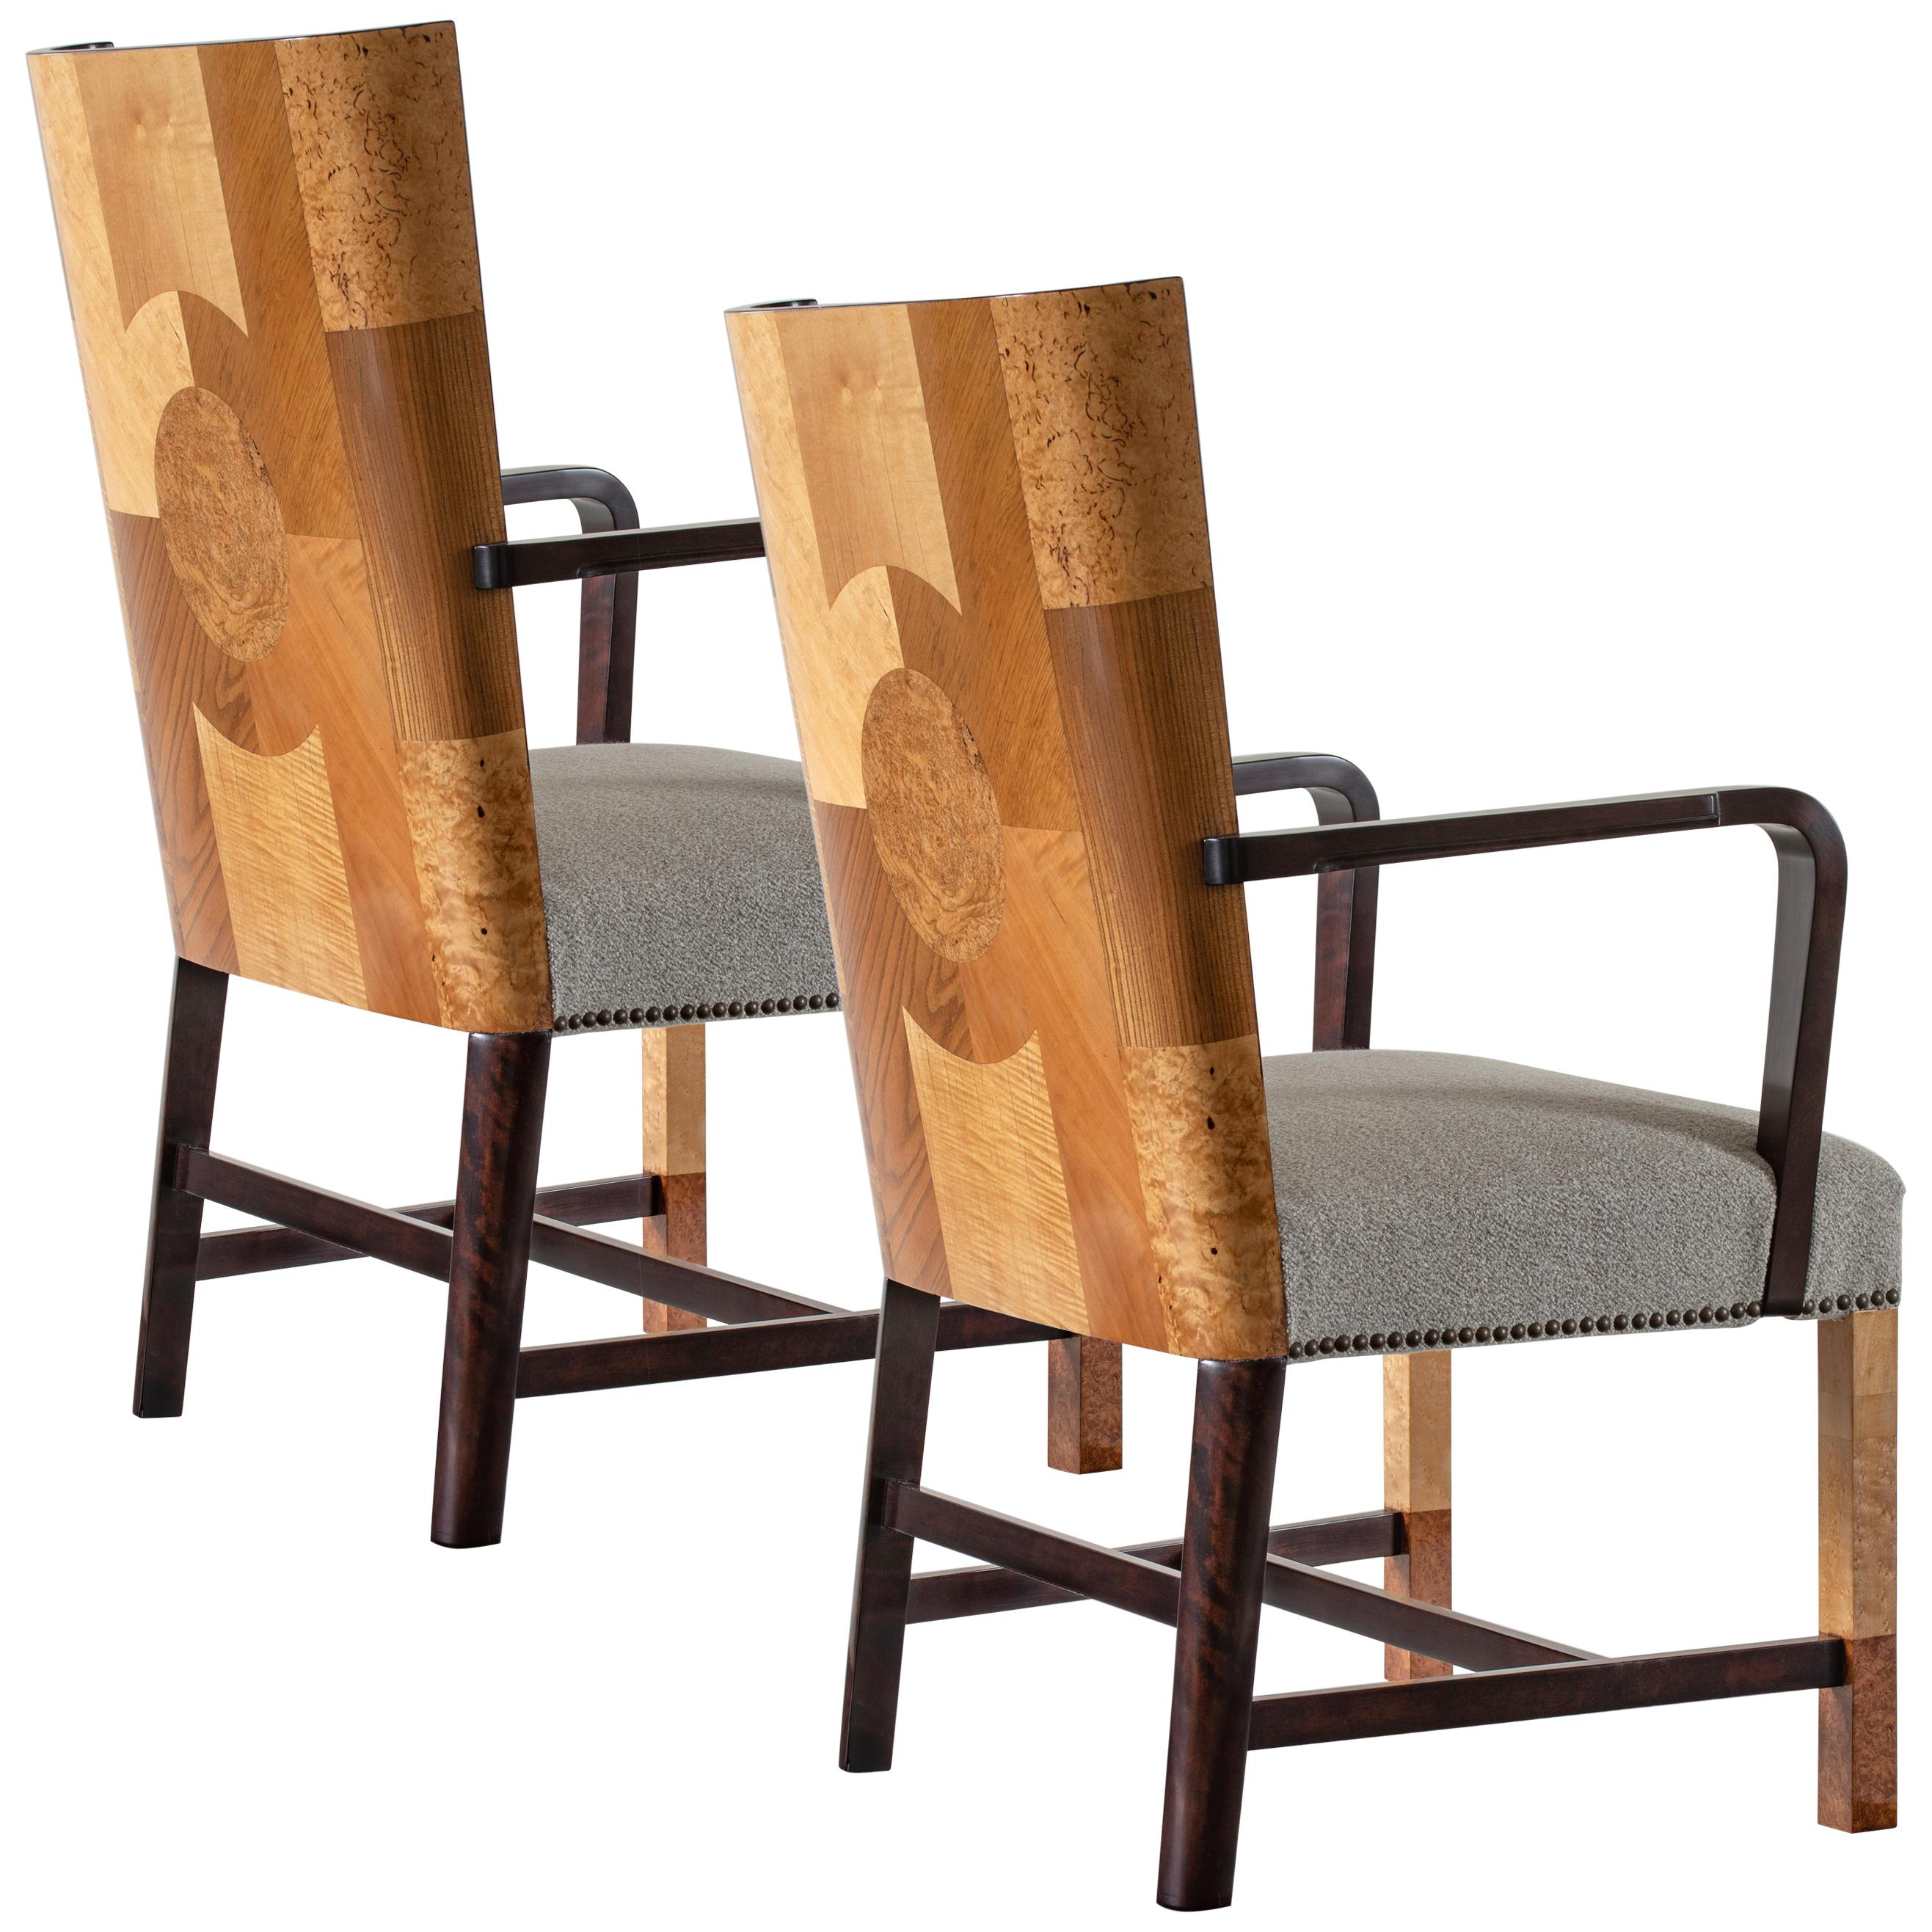 Ferdinand Lundquist & Co., Pair of Large & Rare Swedish Specimen Wood Armchairs For Sale